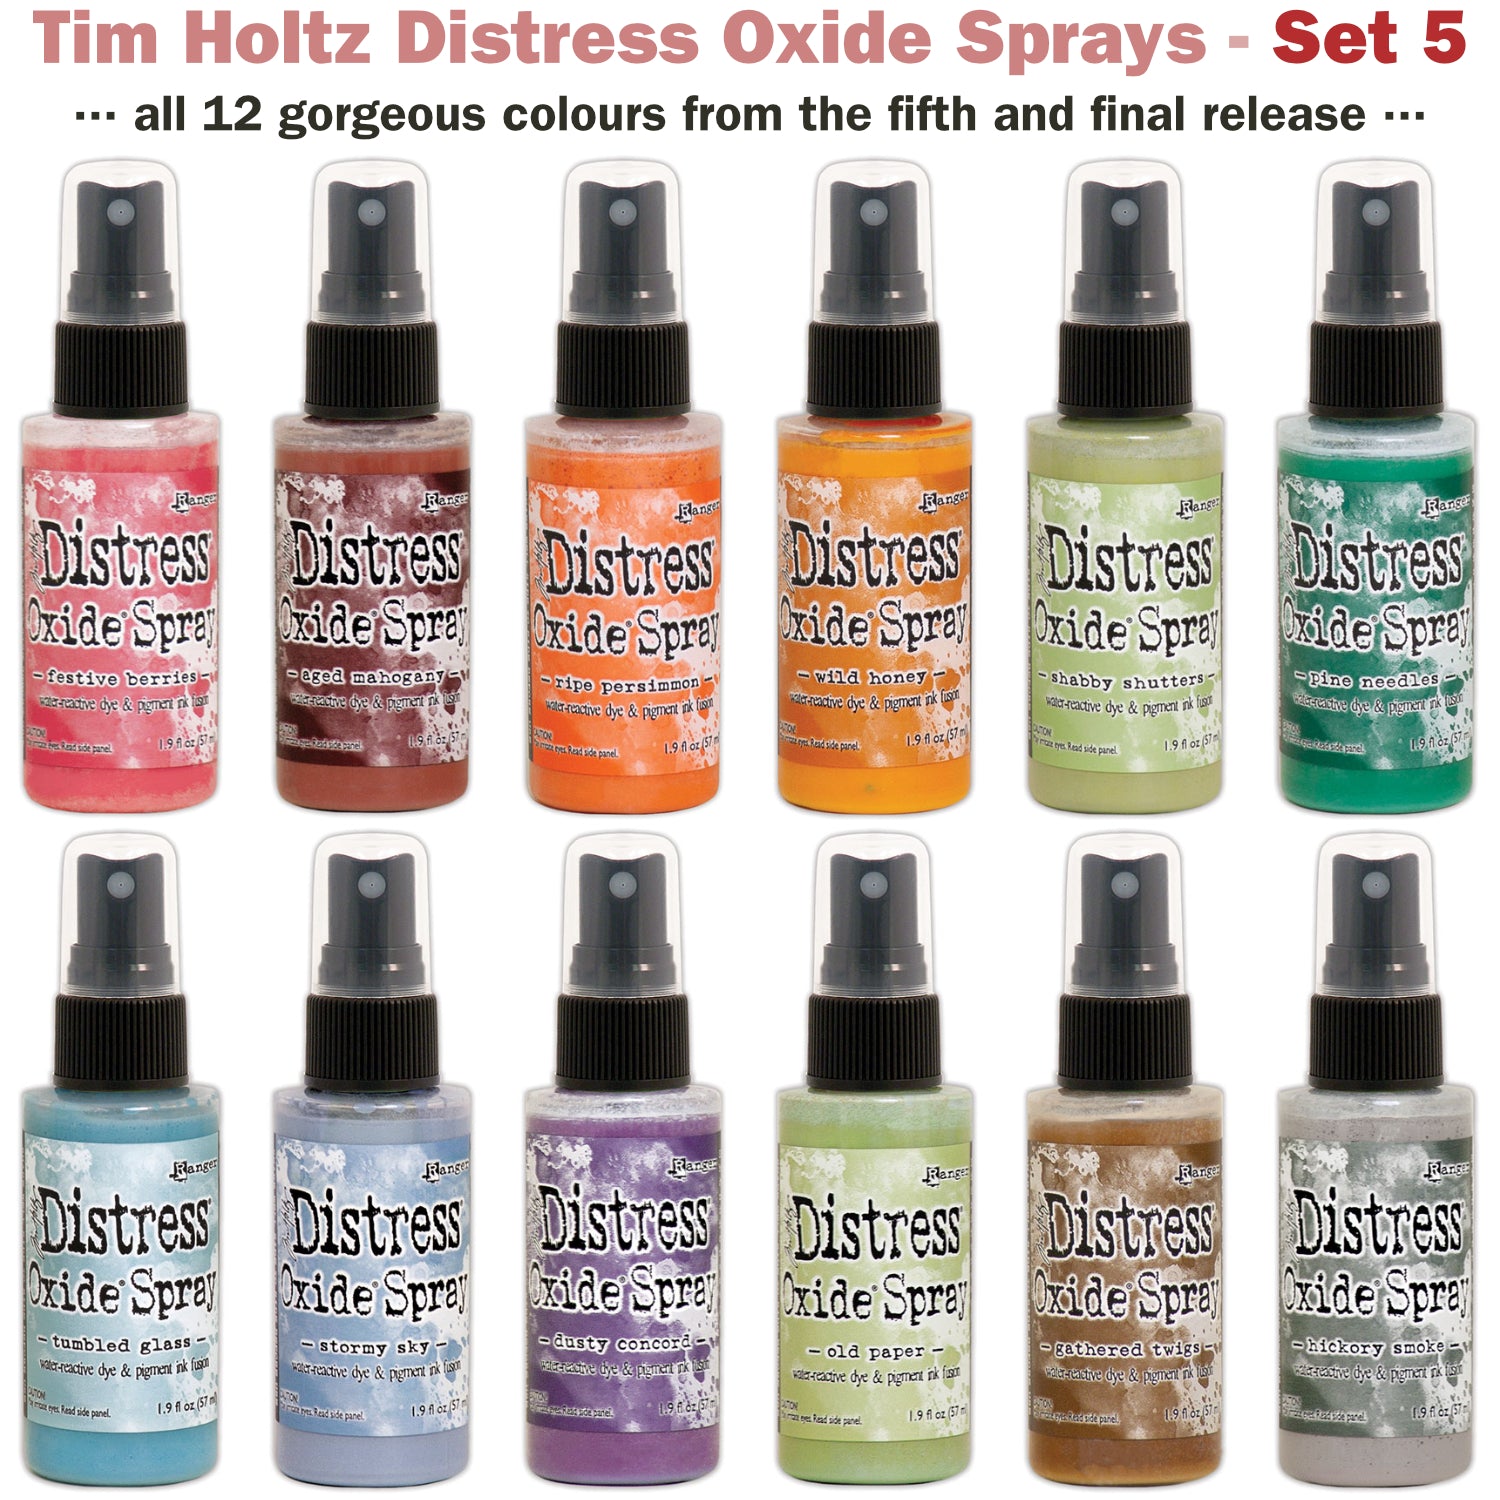 image showing Set 5 of the Distress Oxide Spray from Tim Holtz and Ranger, for sale at Art by Jenny in Australia 